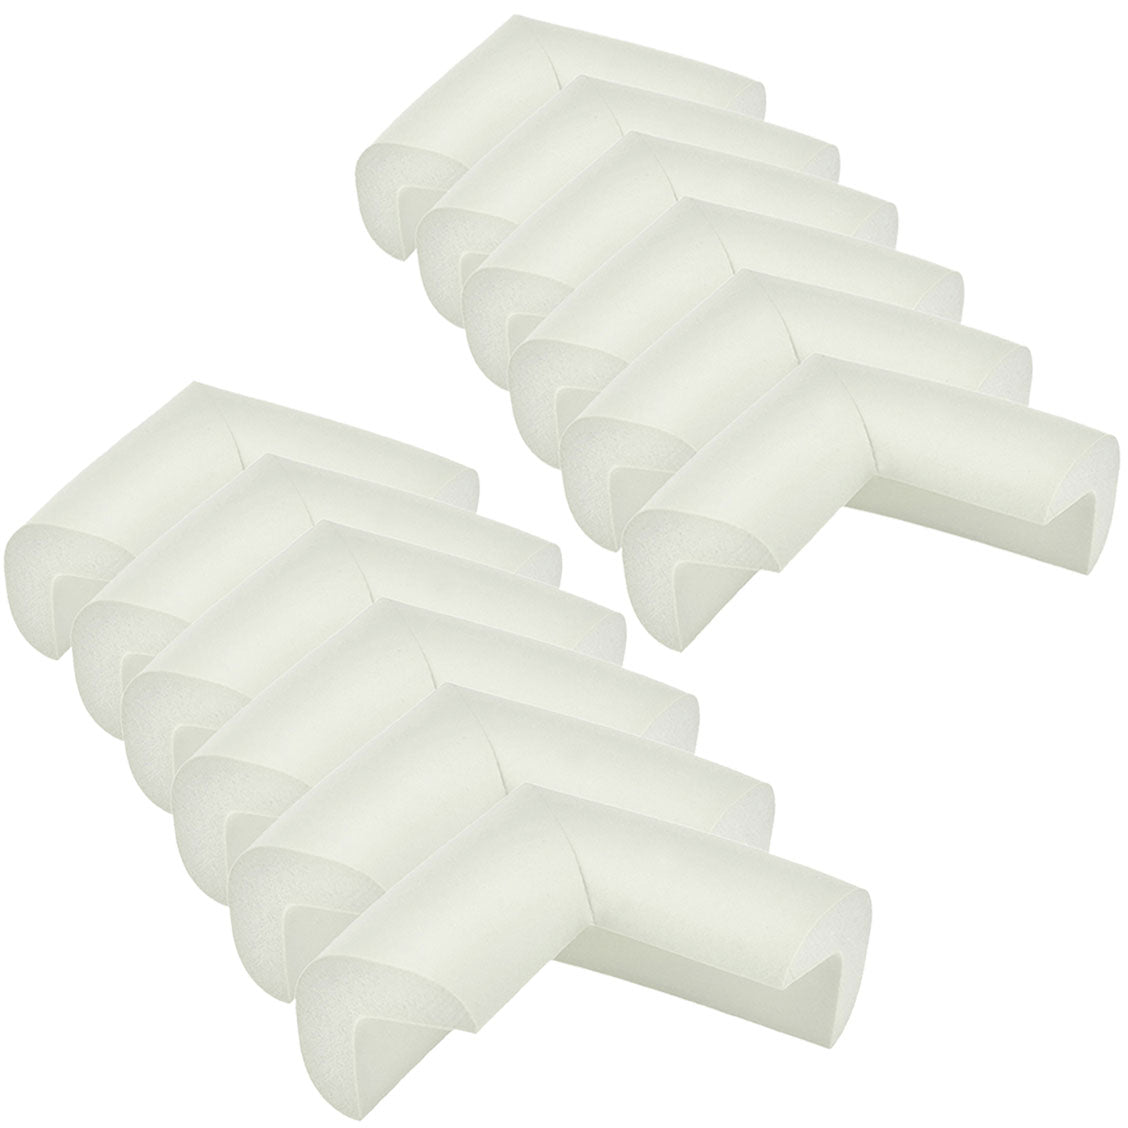 Soft Corner Protector Baby Proofing Edge and Corner Guards, 12